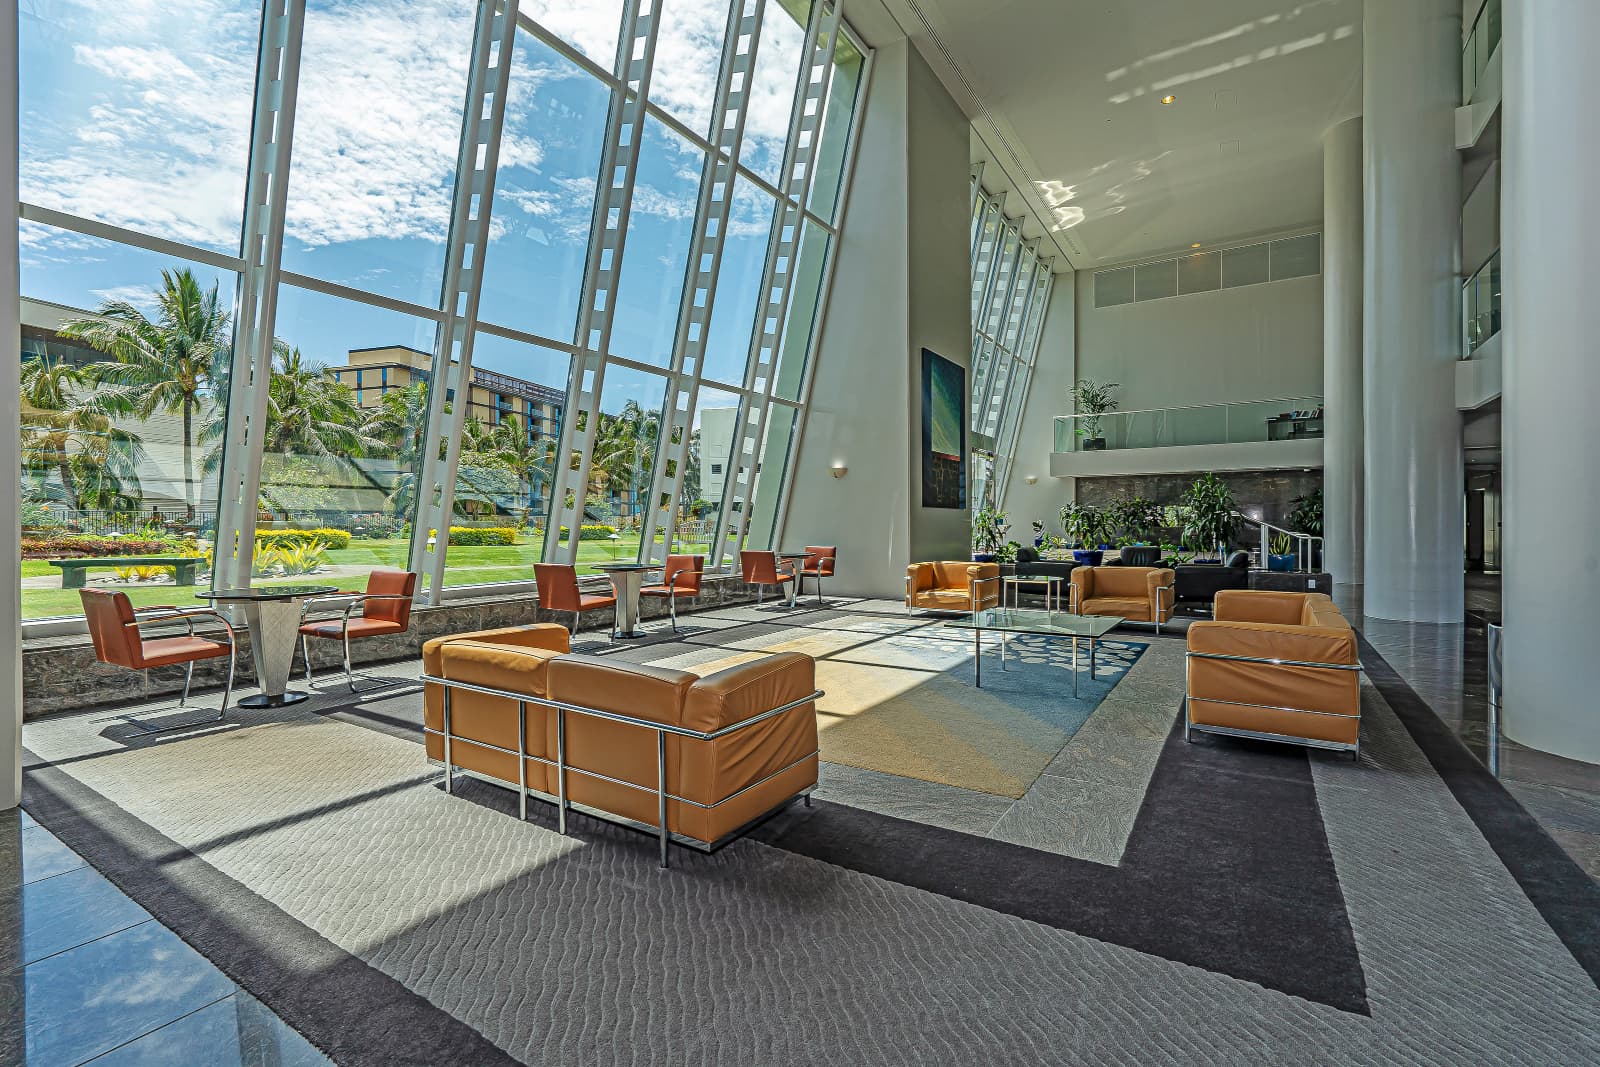 Community area in Hawaiki Tower with large glass windows overlooking a lawn